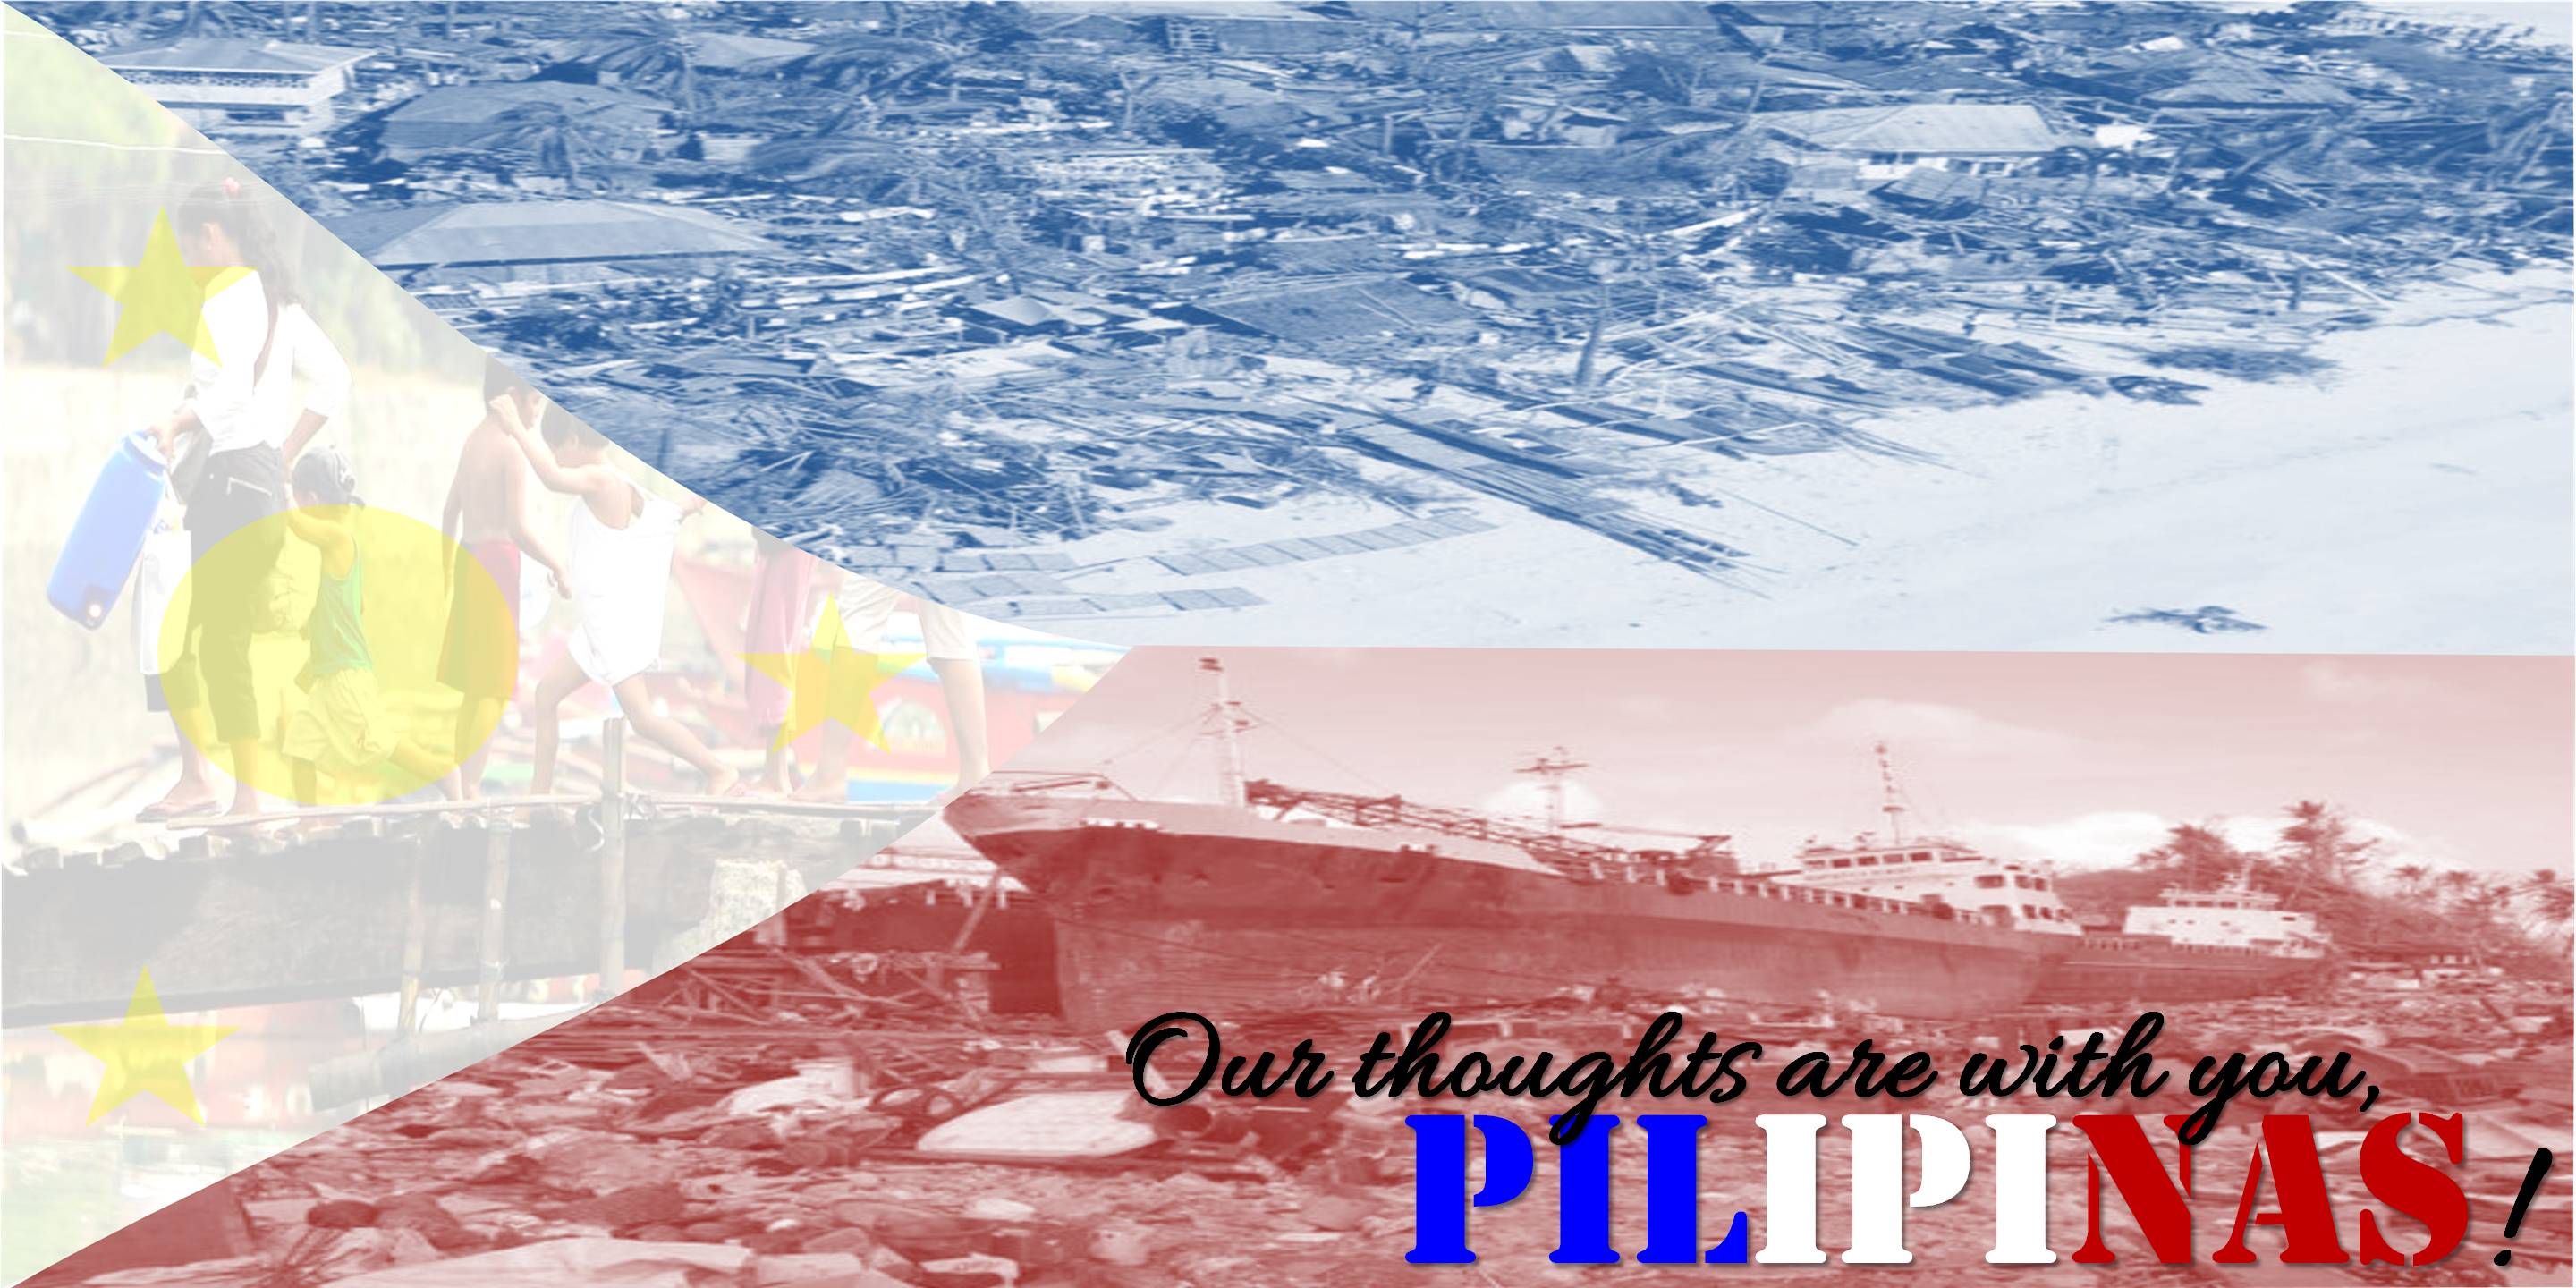 Our thoughts are with You Pilipinas